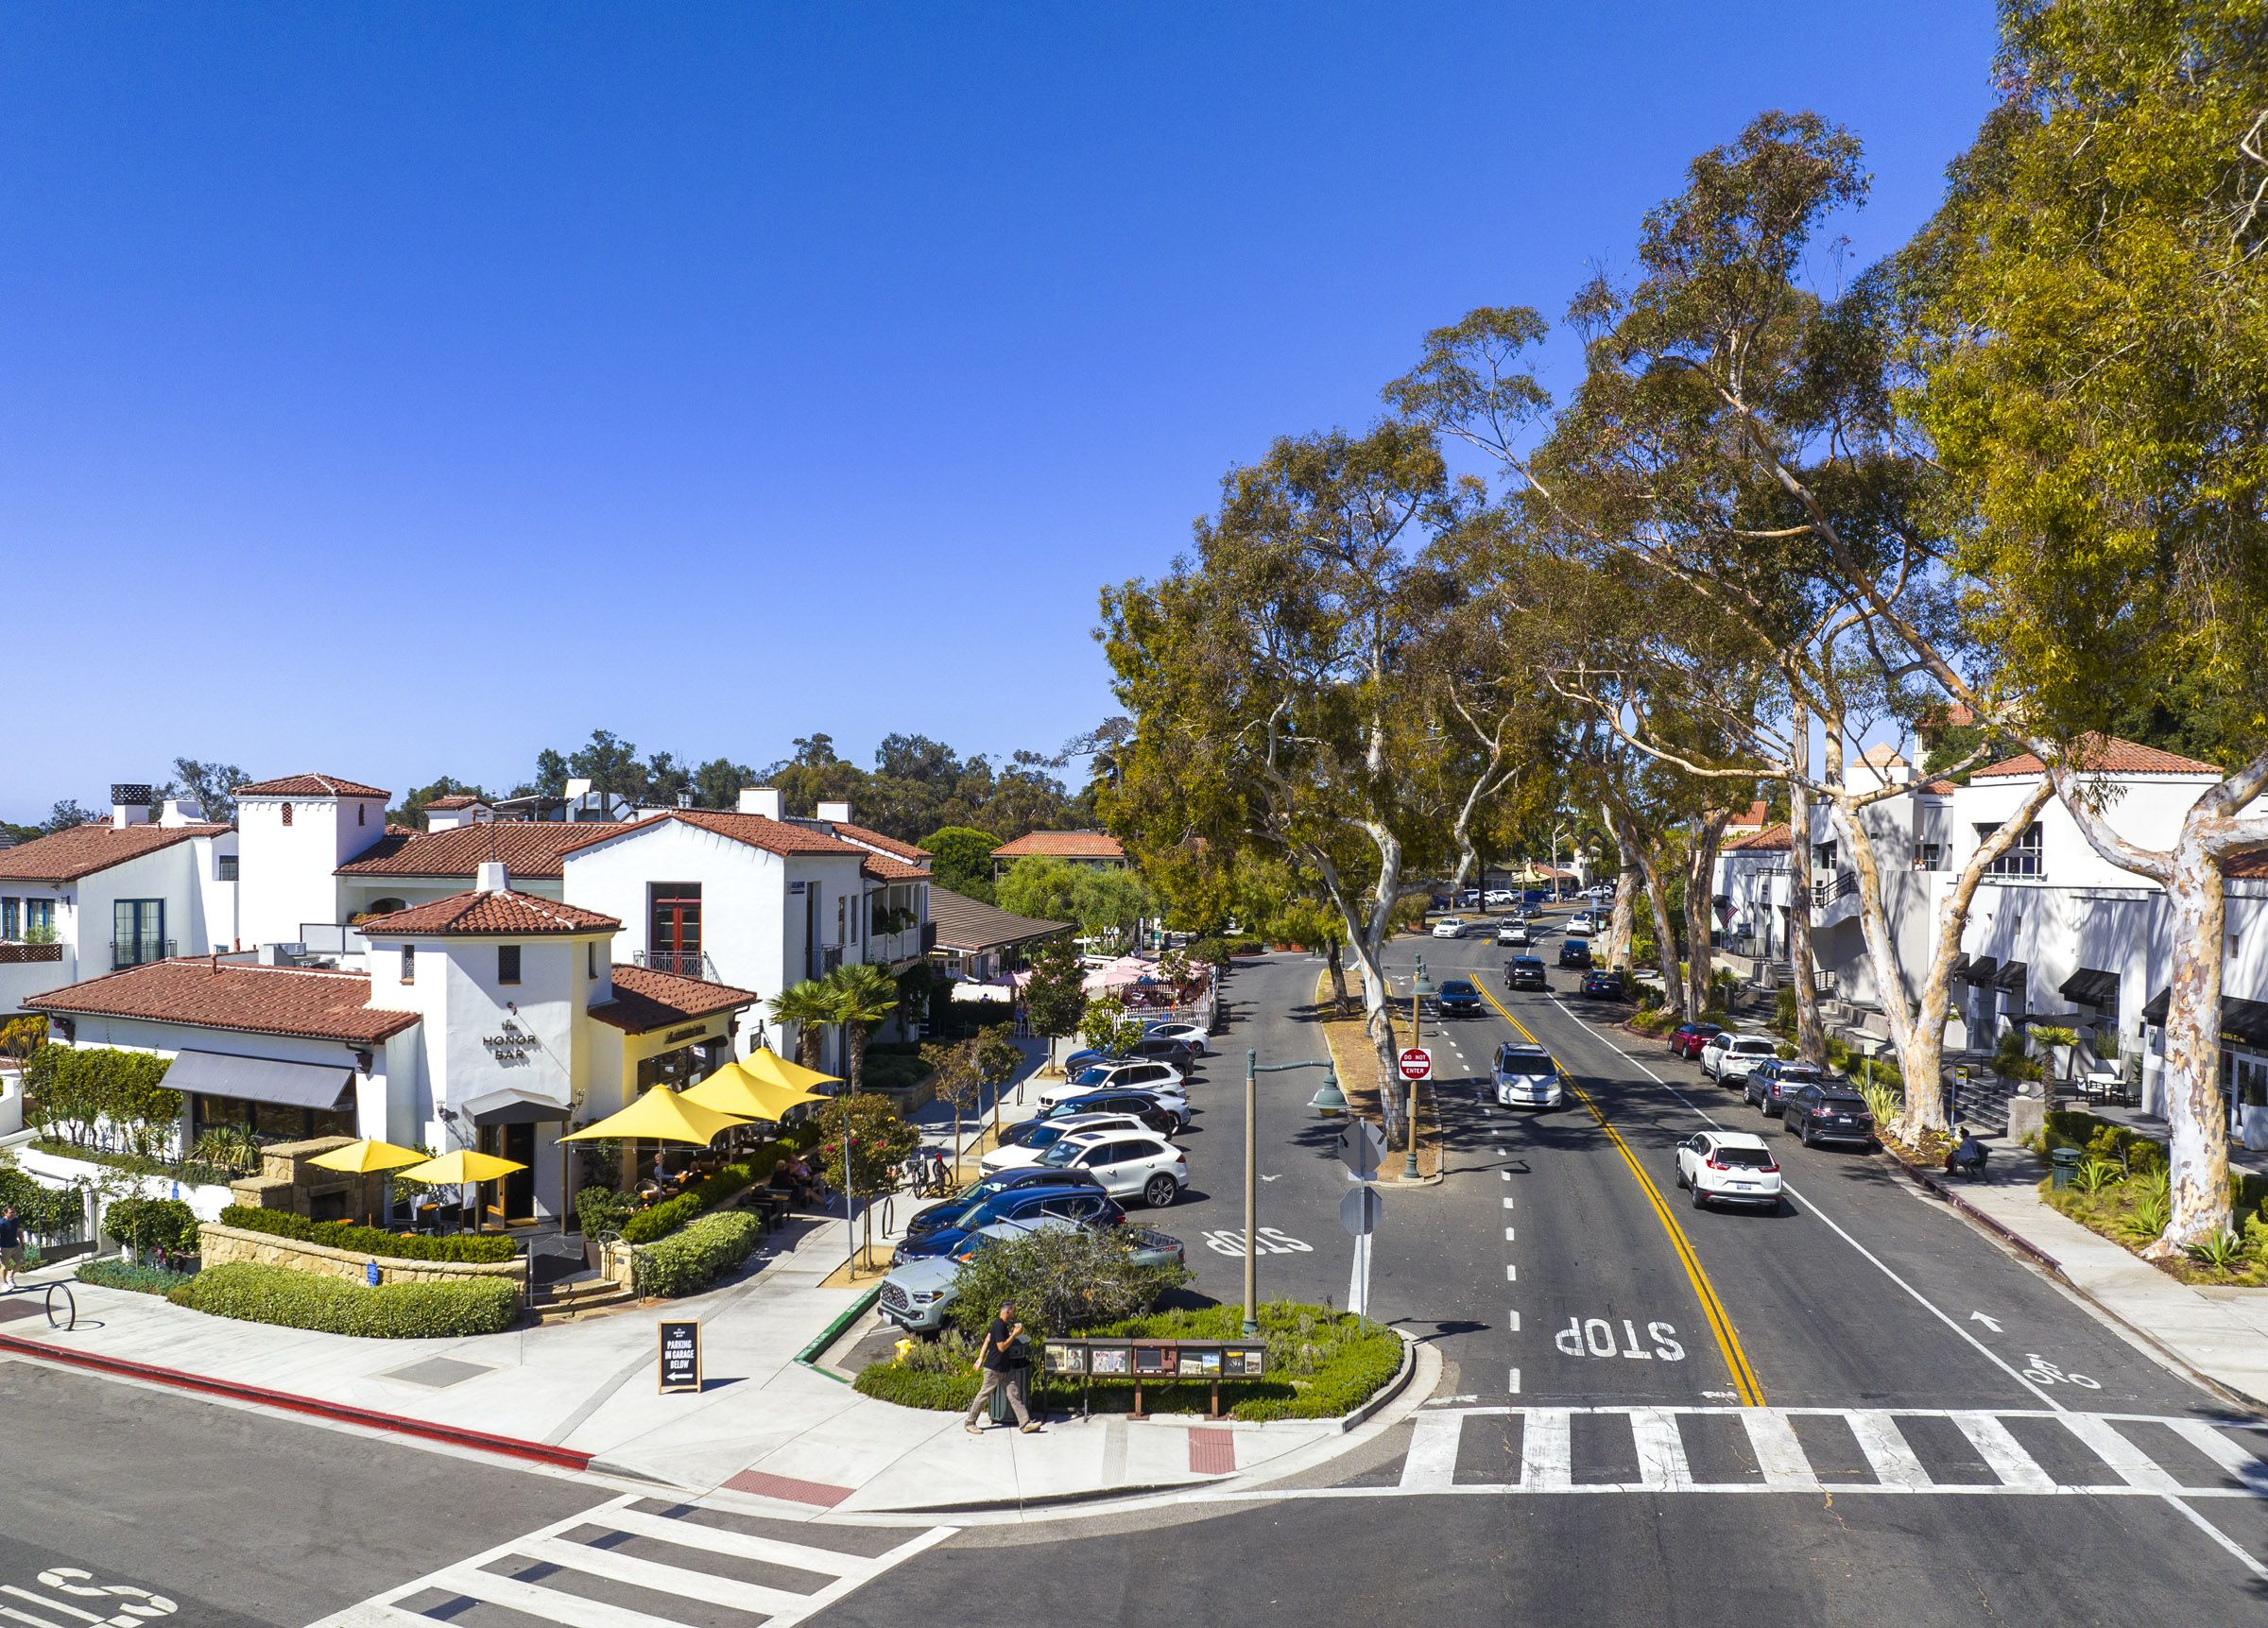 A birds eye view of Coast Village Road, the picturesque street in Montecito, showing white buildings with red tile roofs and a landscaped boulevard